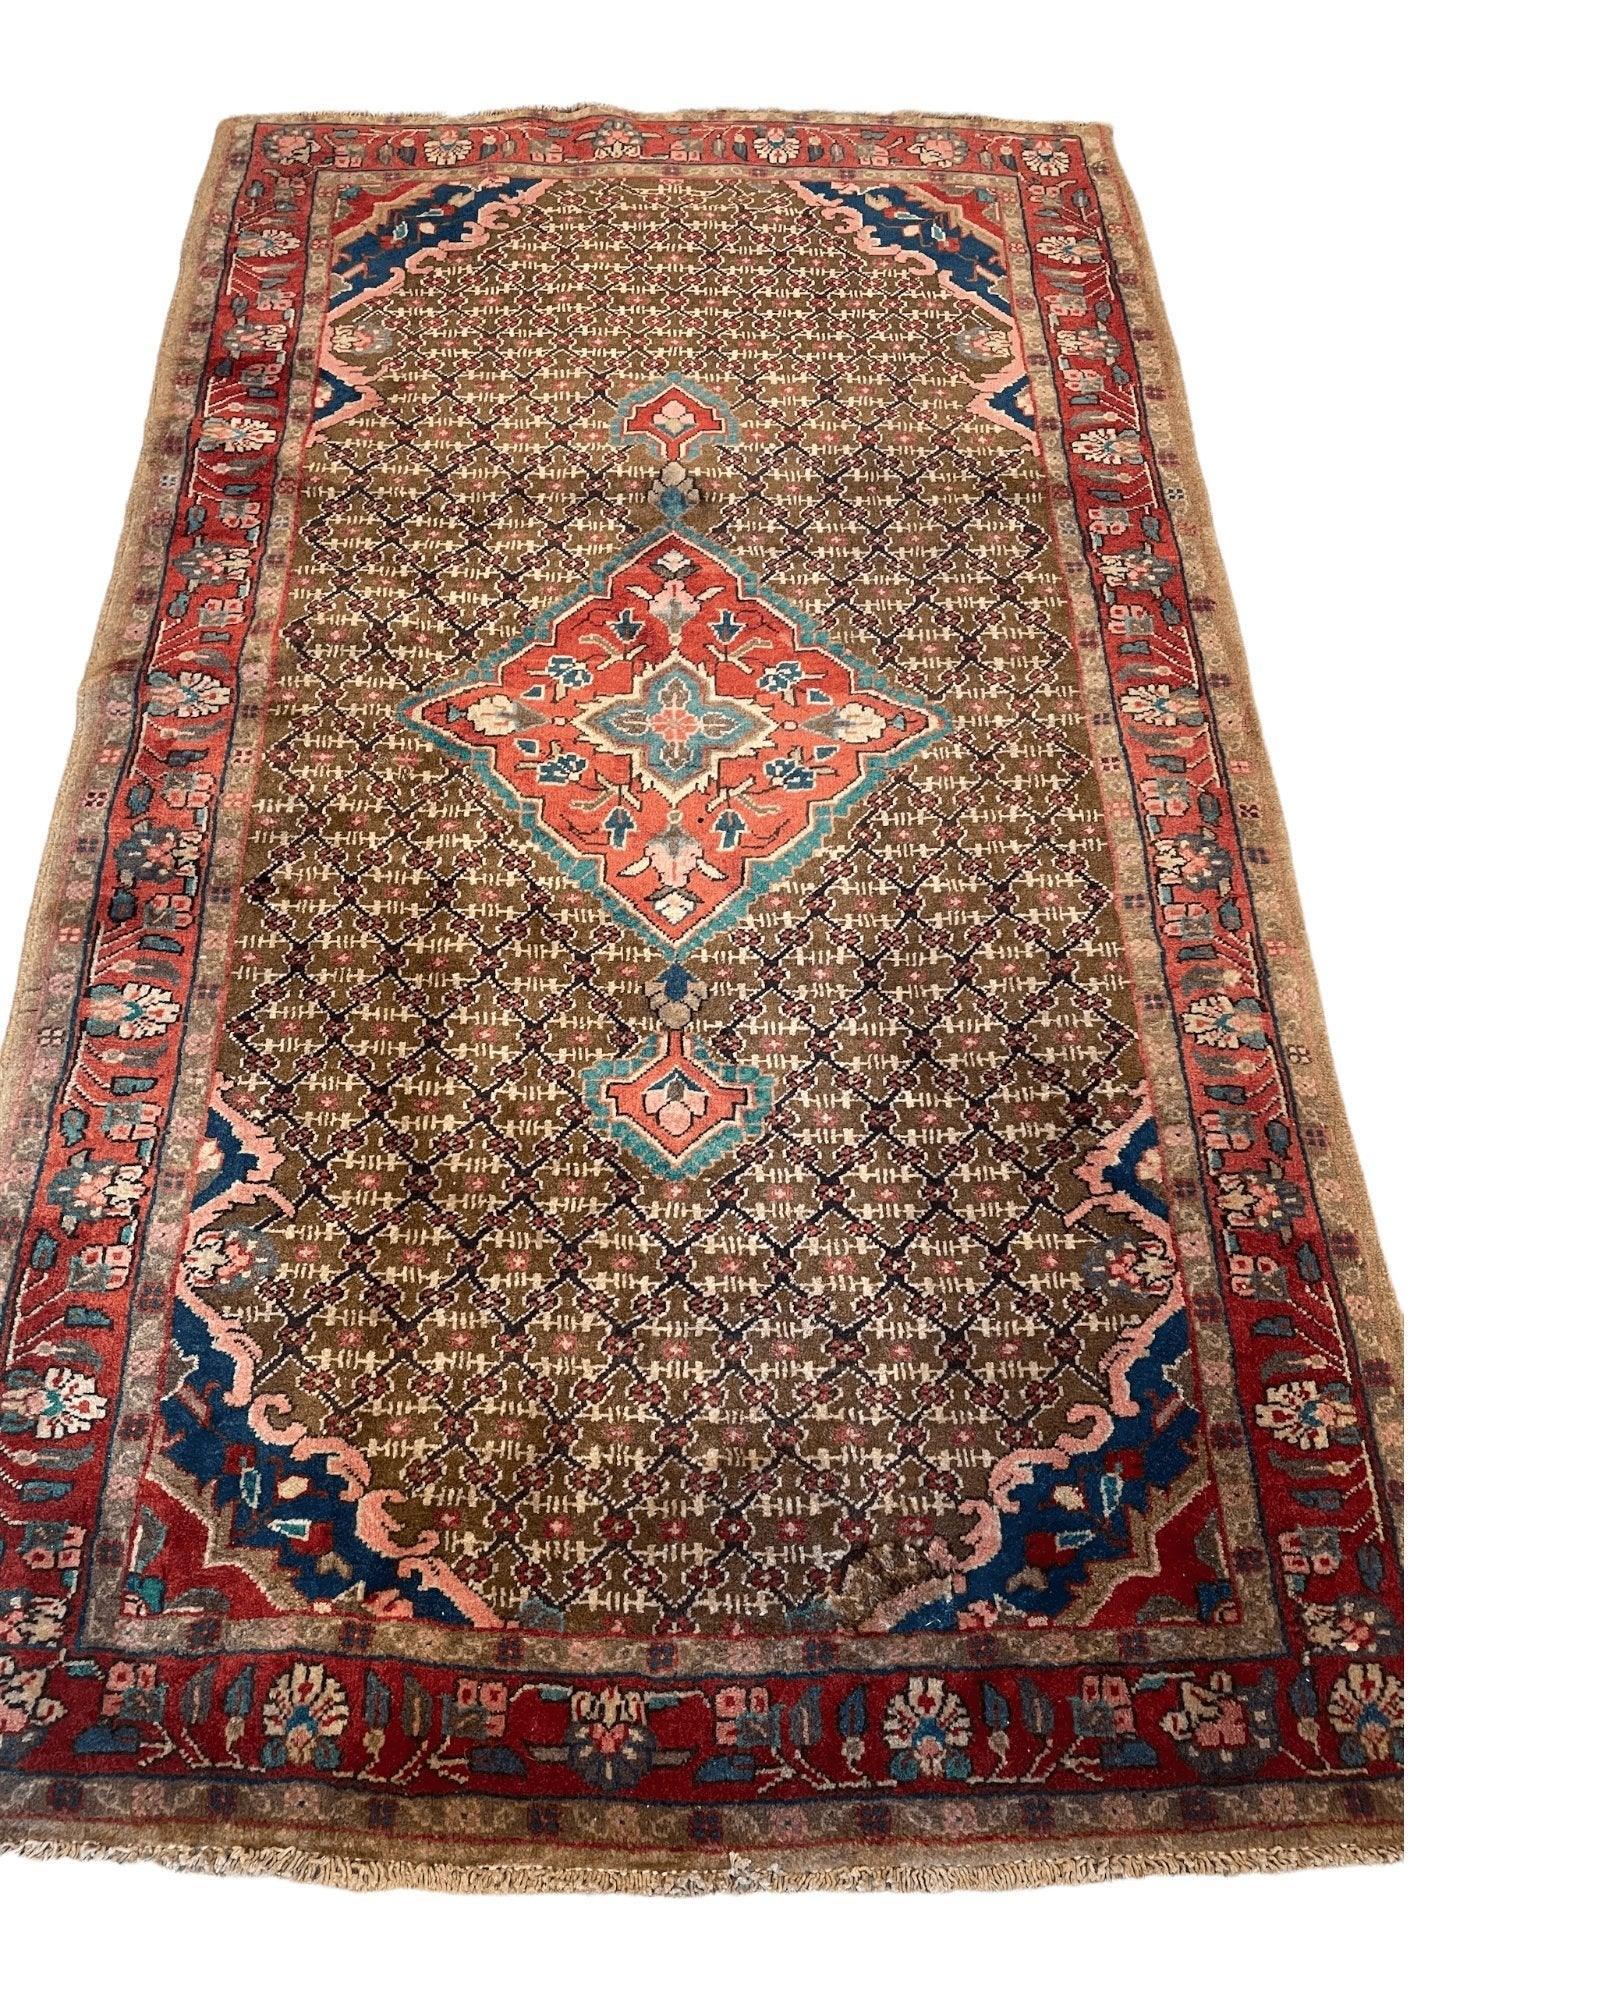 Fine Hand Knotted Persian Gholtogh Rug 3’4'' x 5’6'